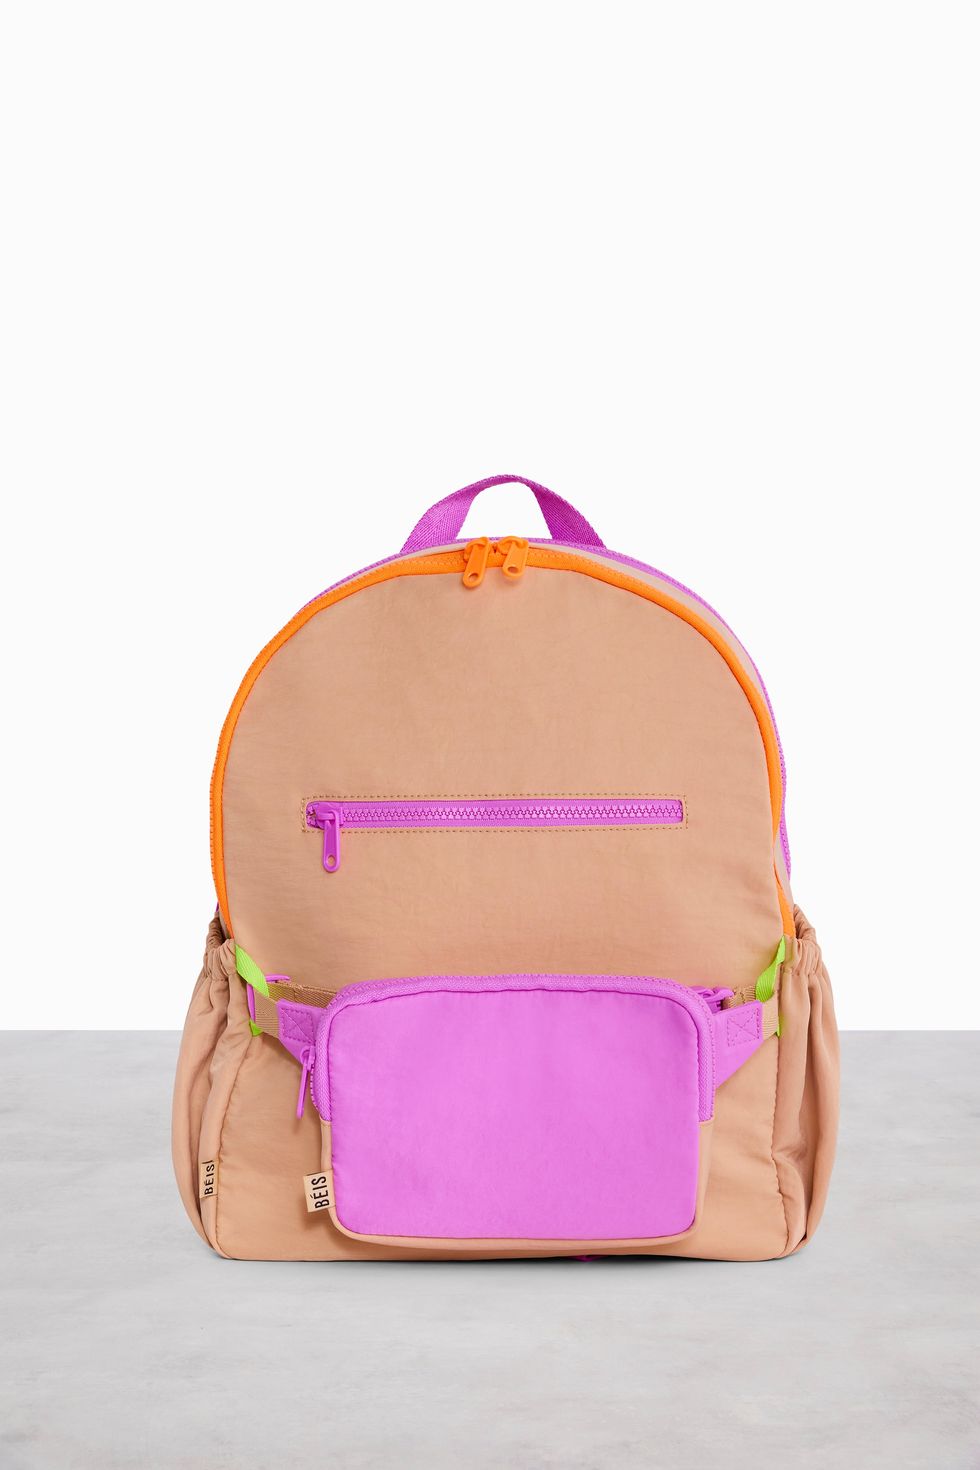 The Kids Backpack